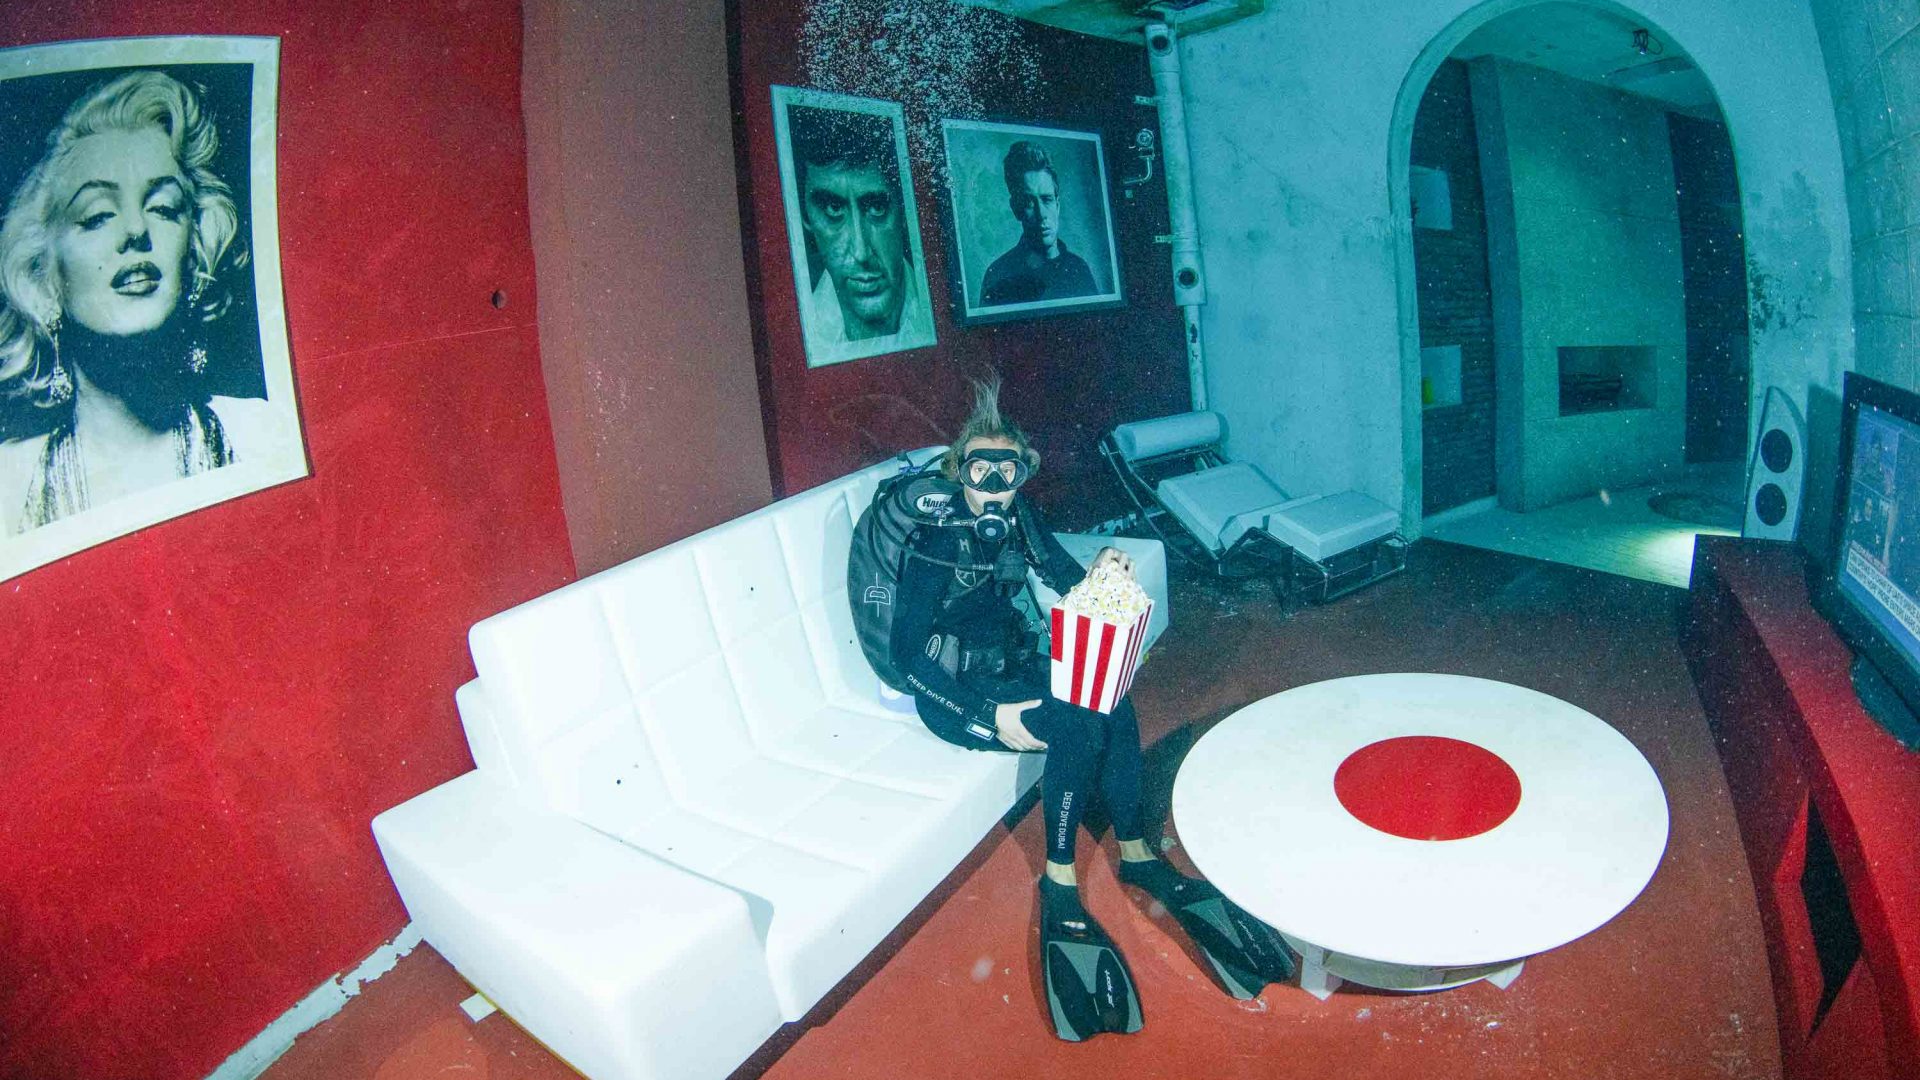 A diver holds a box of popcorn in an underwater living room.